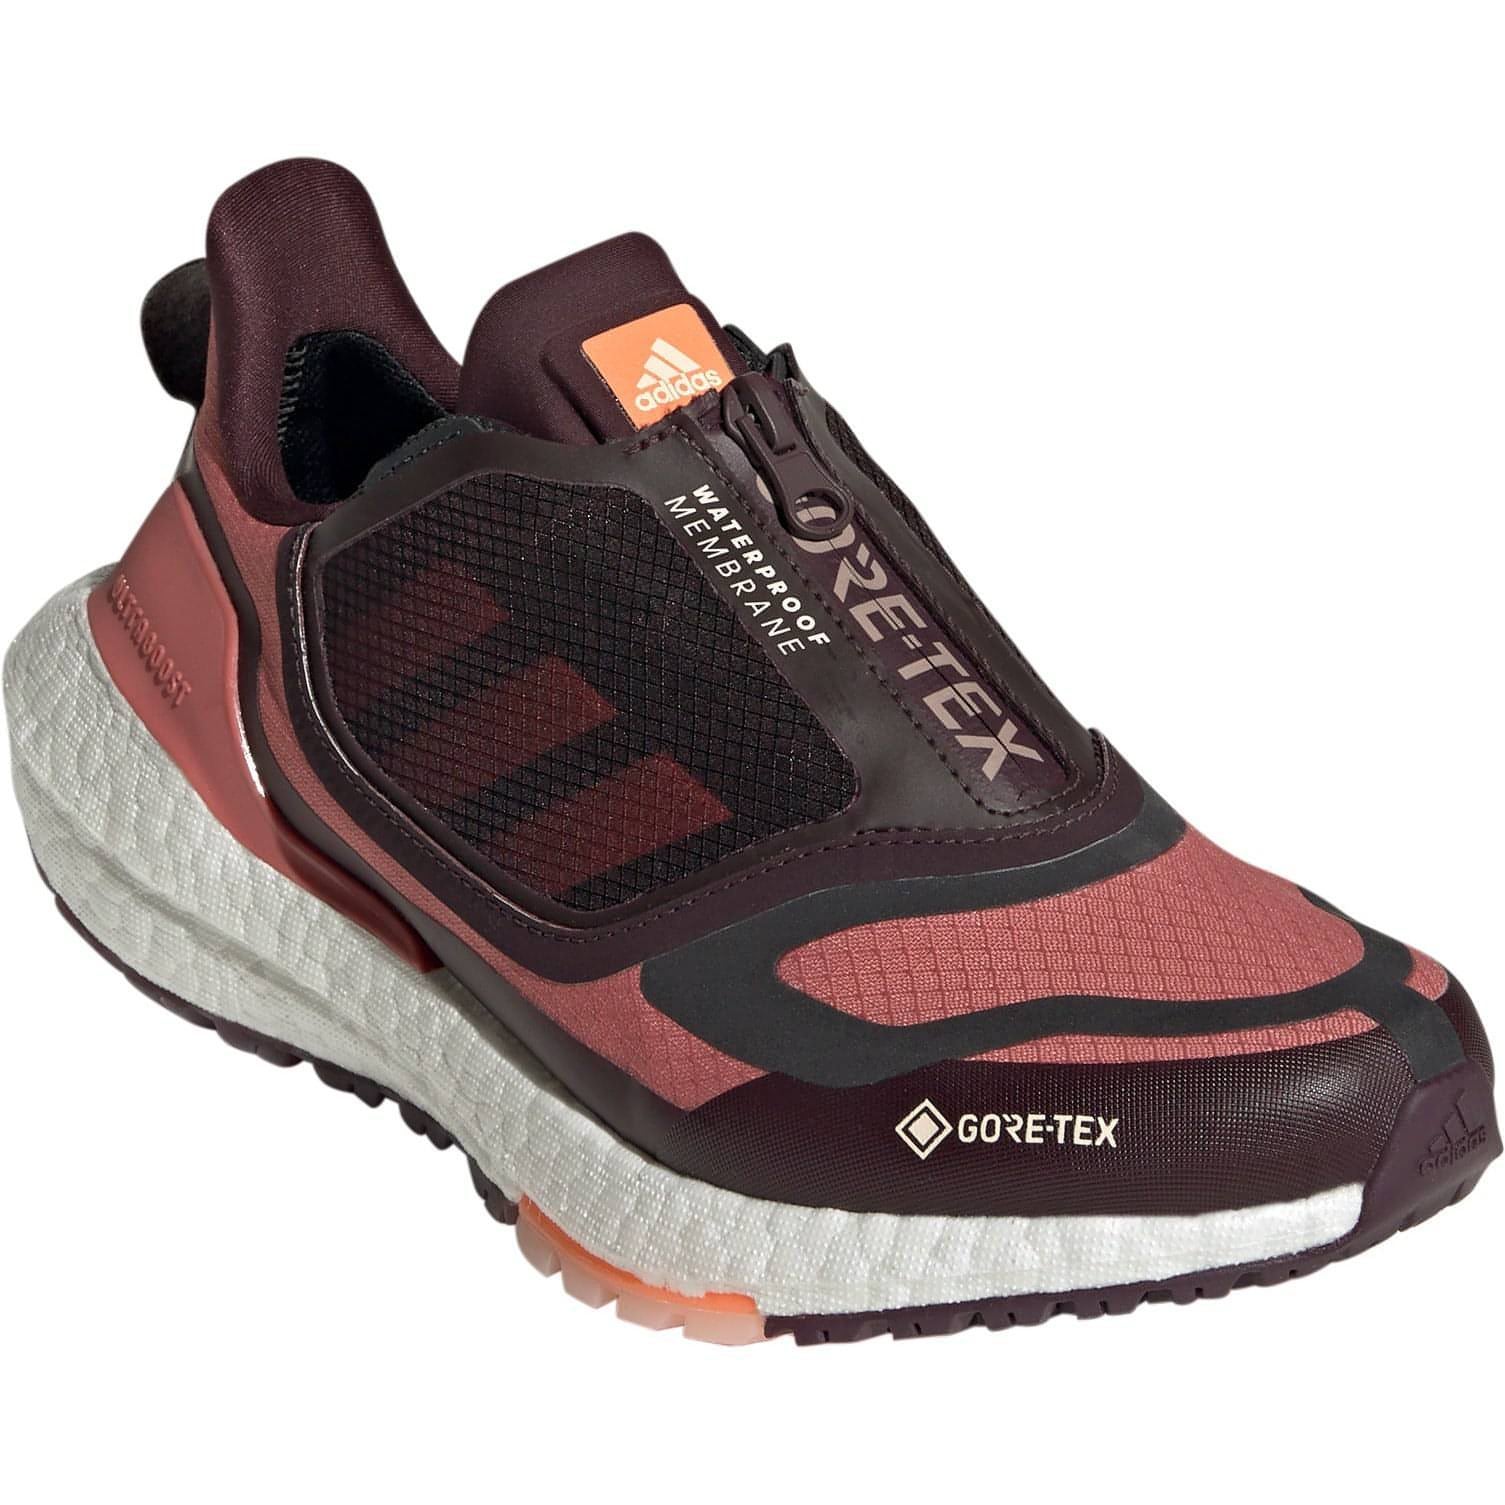 Adidas Ultra Boost Gtx Gx9131 Front - Front View